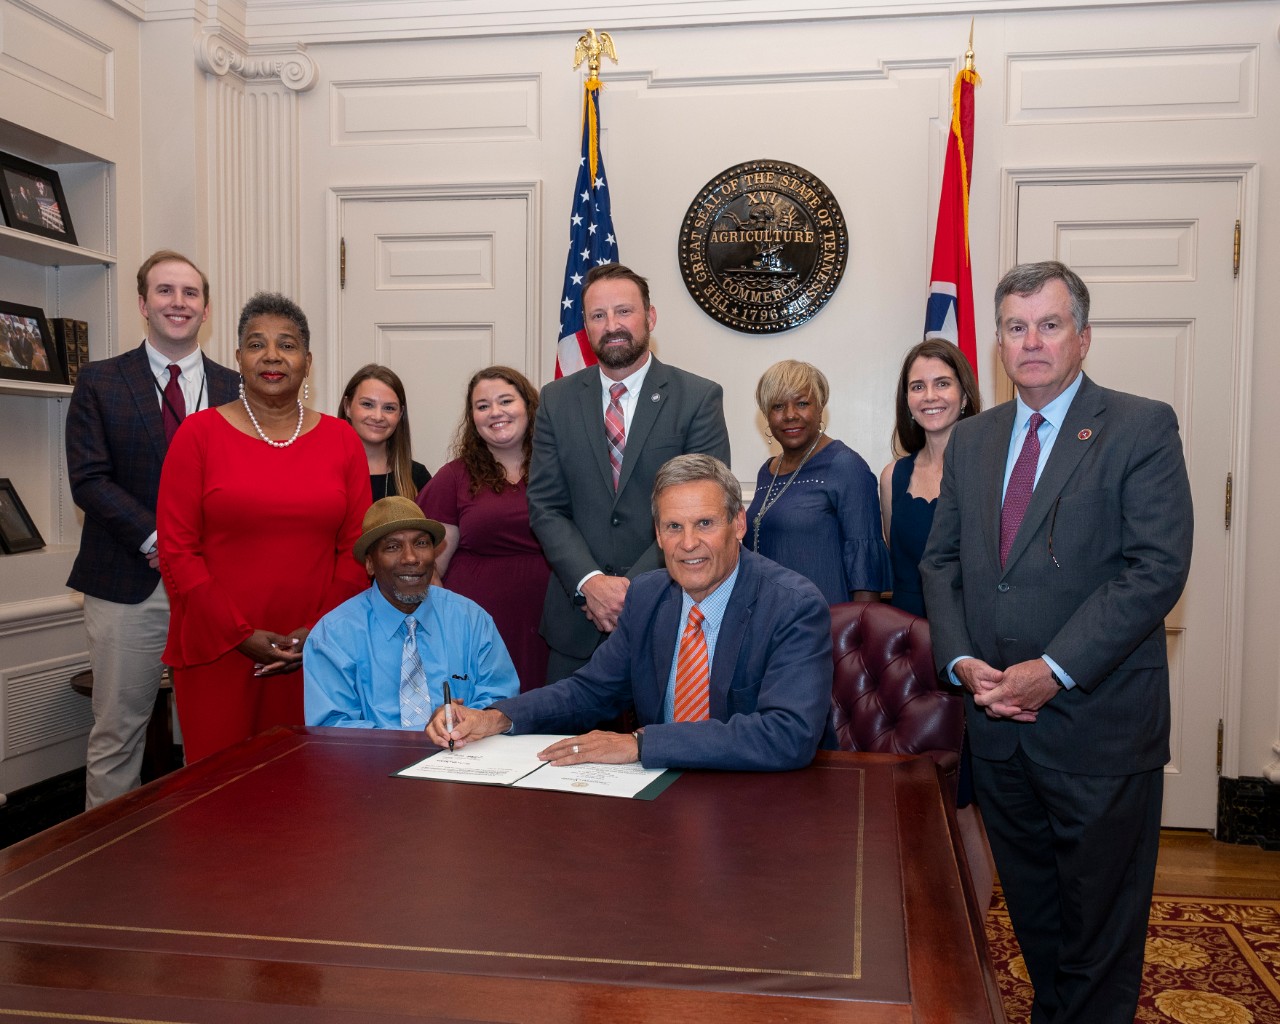 A group of 10 people pose in a formal meeting room with the Tennessee state seal and the U.S. and Tennessee flags in the background. Governor Lee is seated at a table, with a document and pen in front of him. Council member Martez Williams, a middle-aged Black man who uses a wheelchair, is sitting to the Governor’s right at the table. Behind them is a group of adults, both men and women, Black and white, wearing business attire